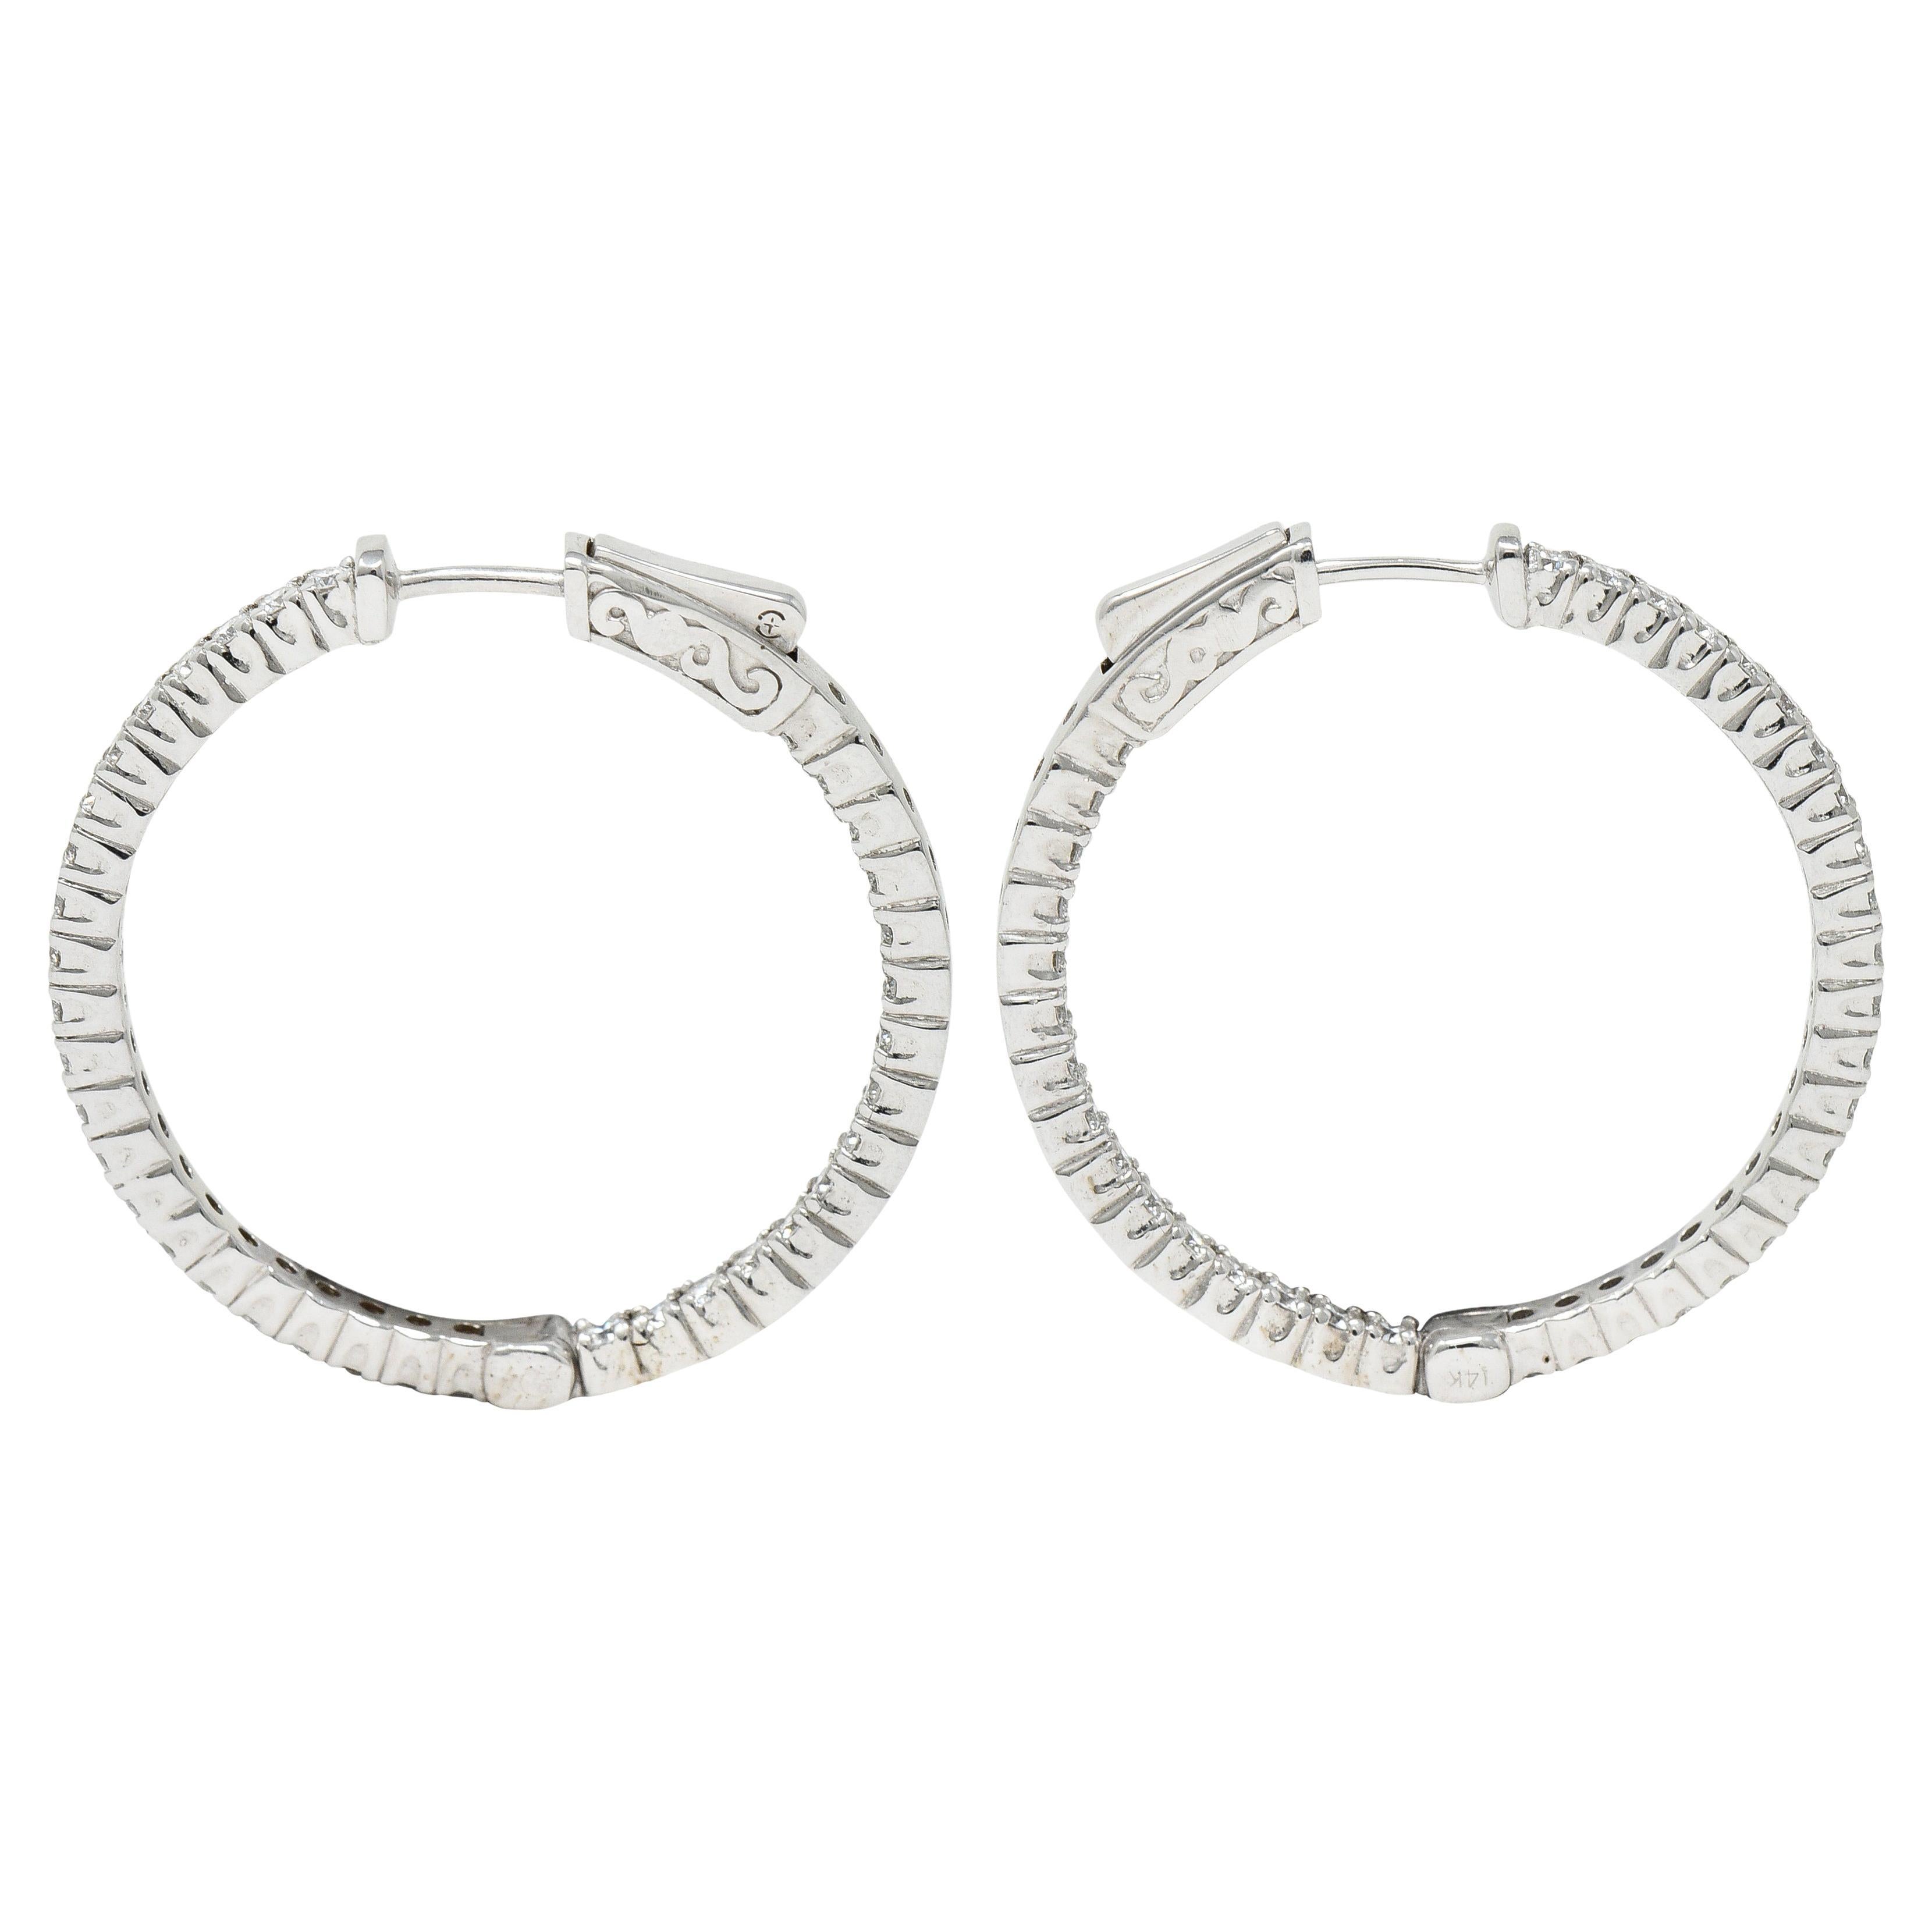 Inside/outside style huggie hoop earrings

With individually set round brilliant cut diamonds

Weighing in total approximately 1.50 carats - G to H color with overall VS clarity

Opens on a hinge via presser revealing posts

Inscribed with carat